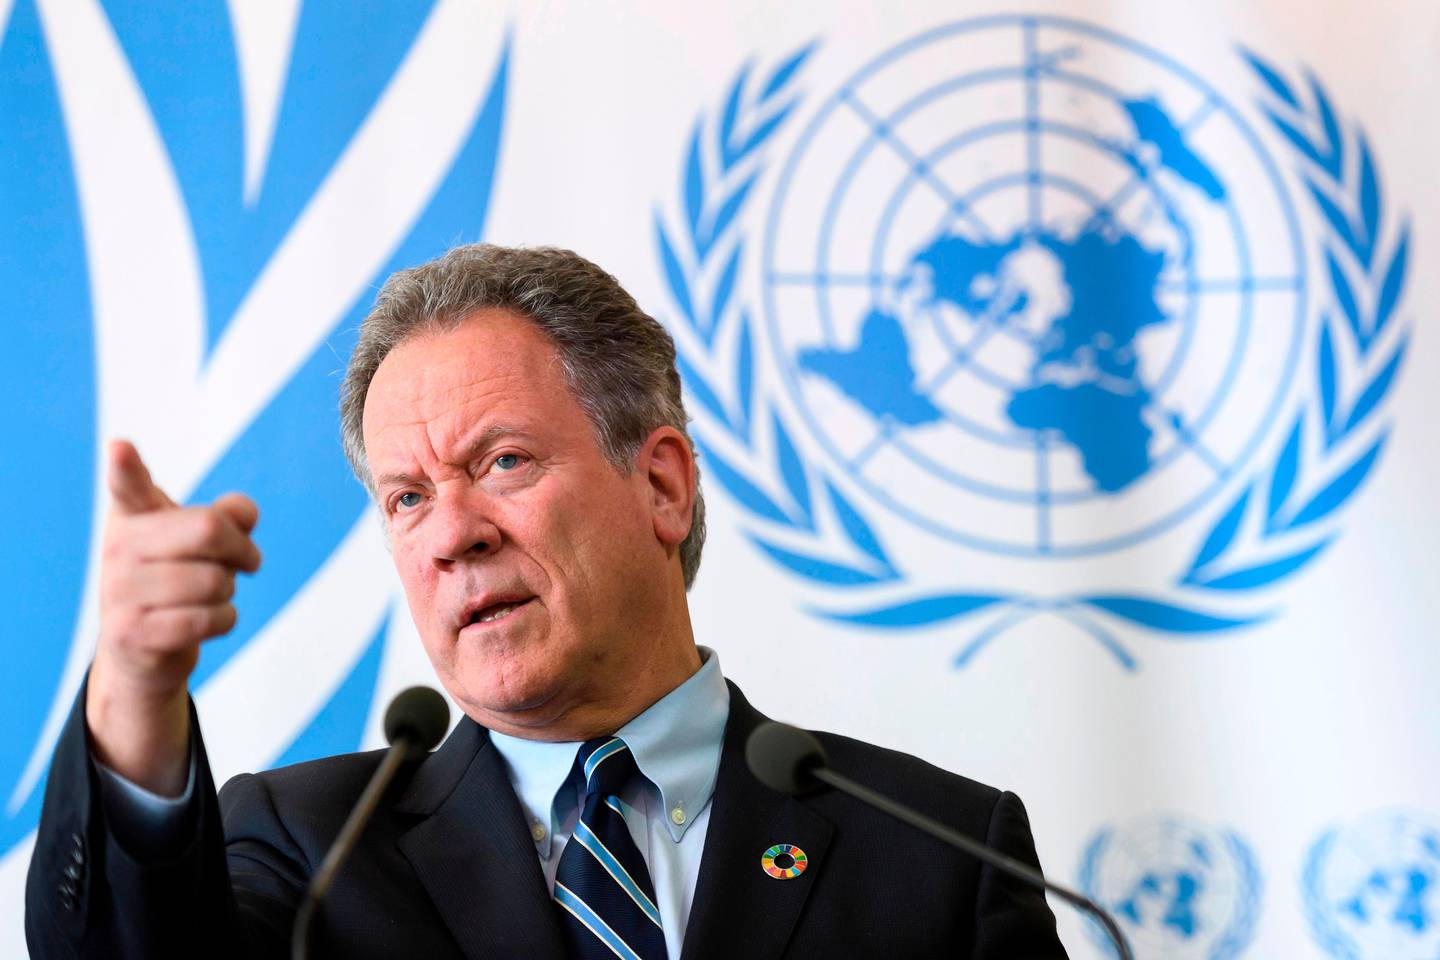 (FILES) In this file photo taken on May 15, 2017 The new head of the World Food Programme (WFP) David Beasley attends a press conference about an updated aid appeal for South Sudan on May 15, 2017 at the United Nations Office in Geneva. - Adjusting to a world where travel is hampered by the pandemic, this year's Nobel laureates will receive their prizes at home this week following the cancellation of the traditional Stockholm and Oslo ceremonies. The prestigious Nobel Peace Prize, which is normally handed out in Norway's capital Oslo, will be presented in Rome on December 10, 2020 to World Food Programme executive director David Beasley at a ceremony broadcast online. (Photo by Fabrice COFFRINI / AFP)